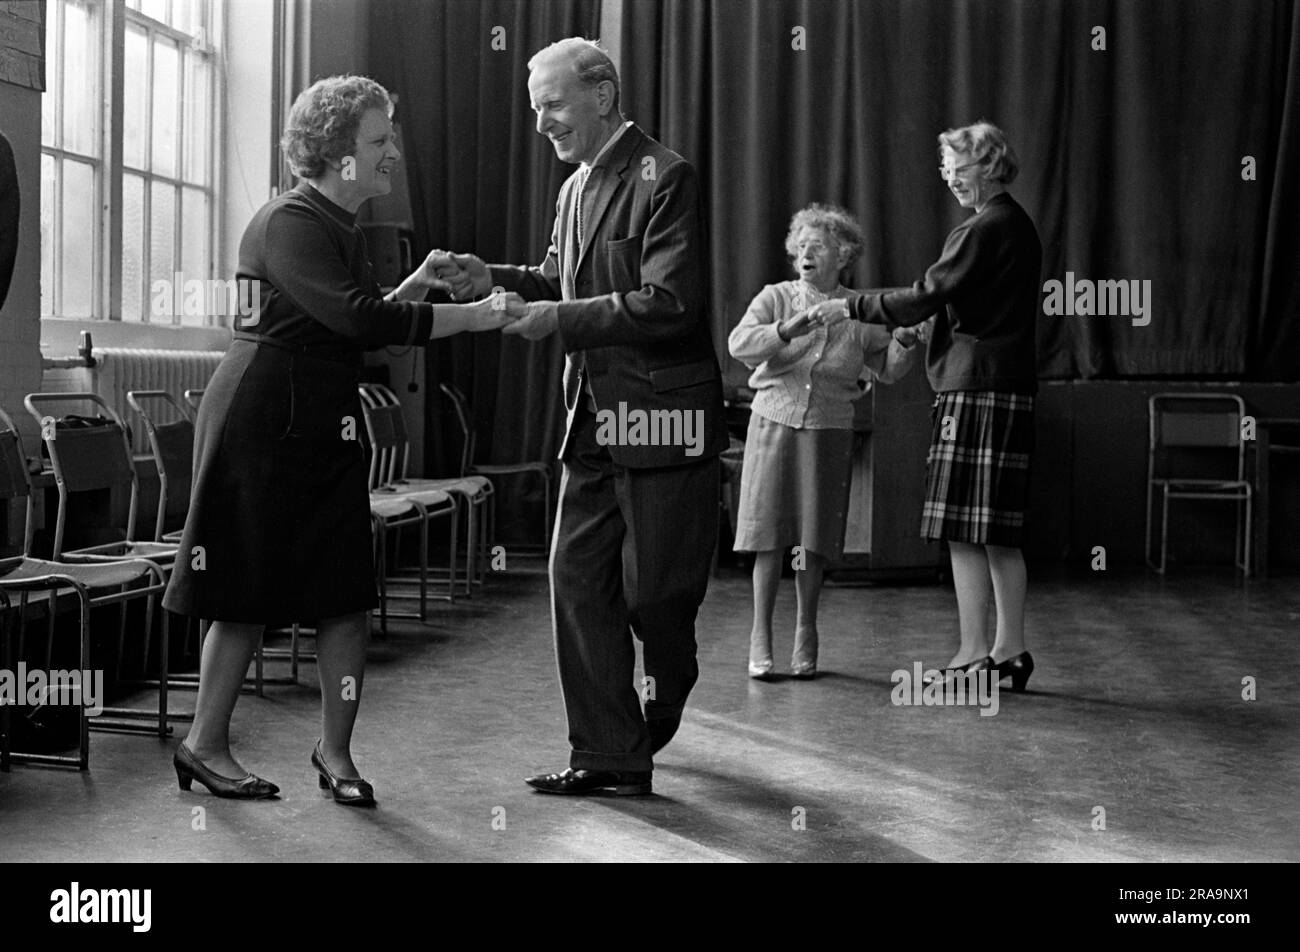 Darby and Joan Club. A blind and partially sighted afternoon dance class for senior citizens at the Battersea Institute. Battersea, London, England 1970. 1970s UK HOMER SYKES Stock Photo